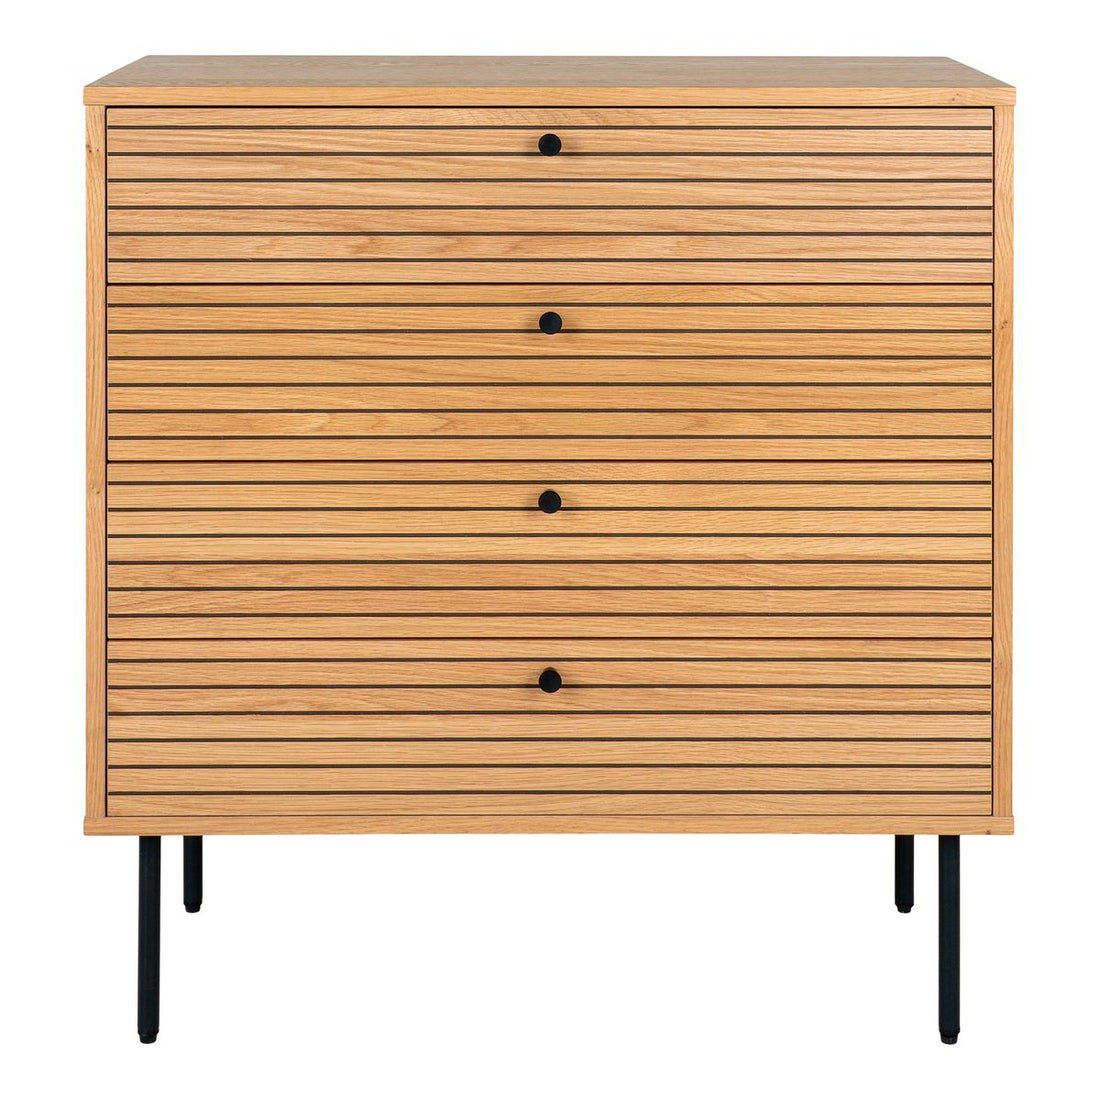 House Nordic Kyoto chest of drawers